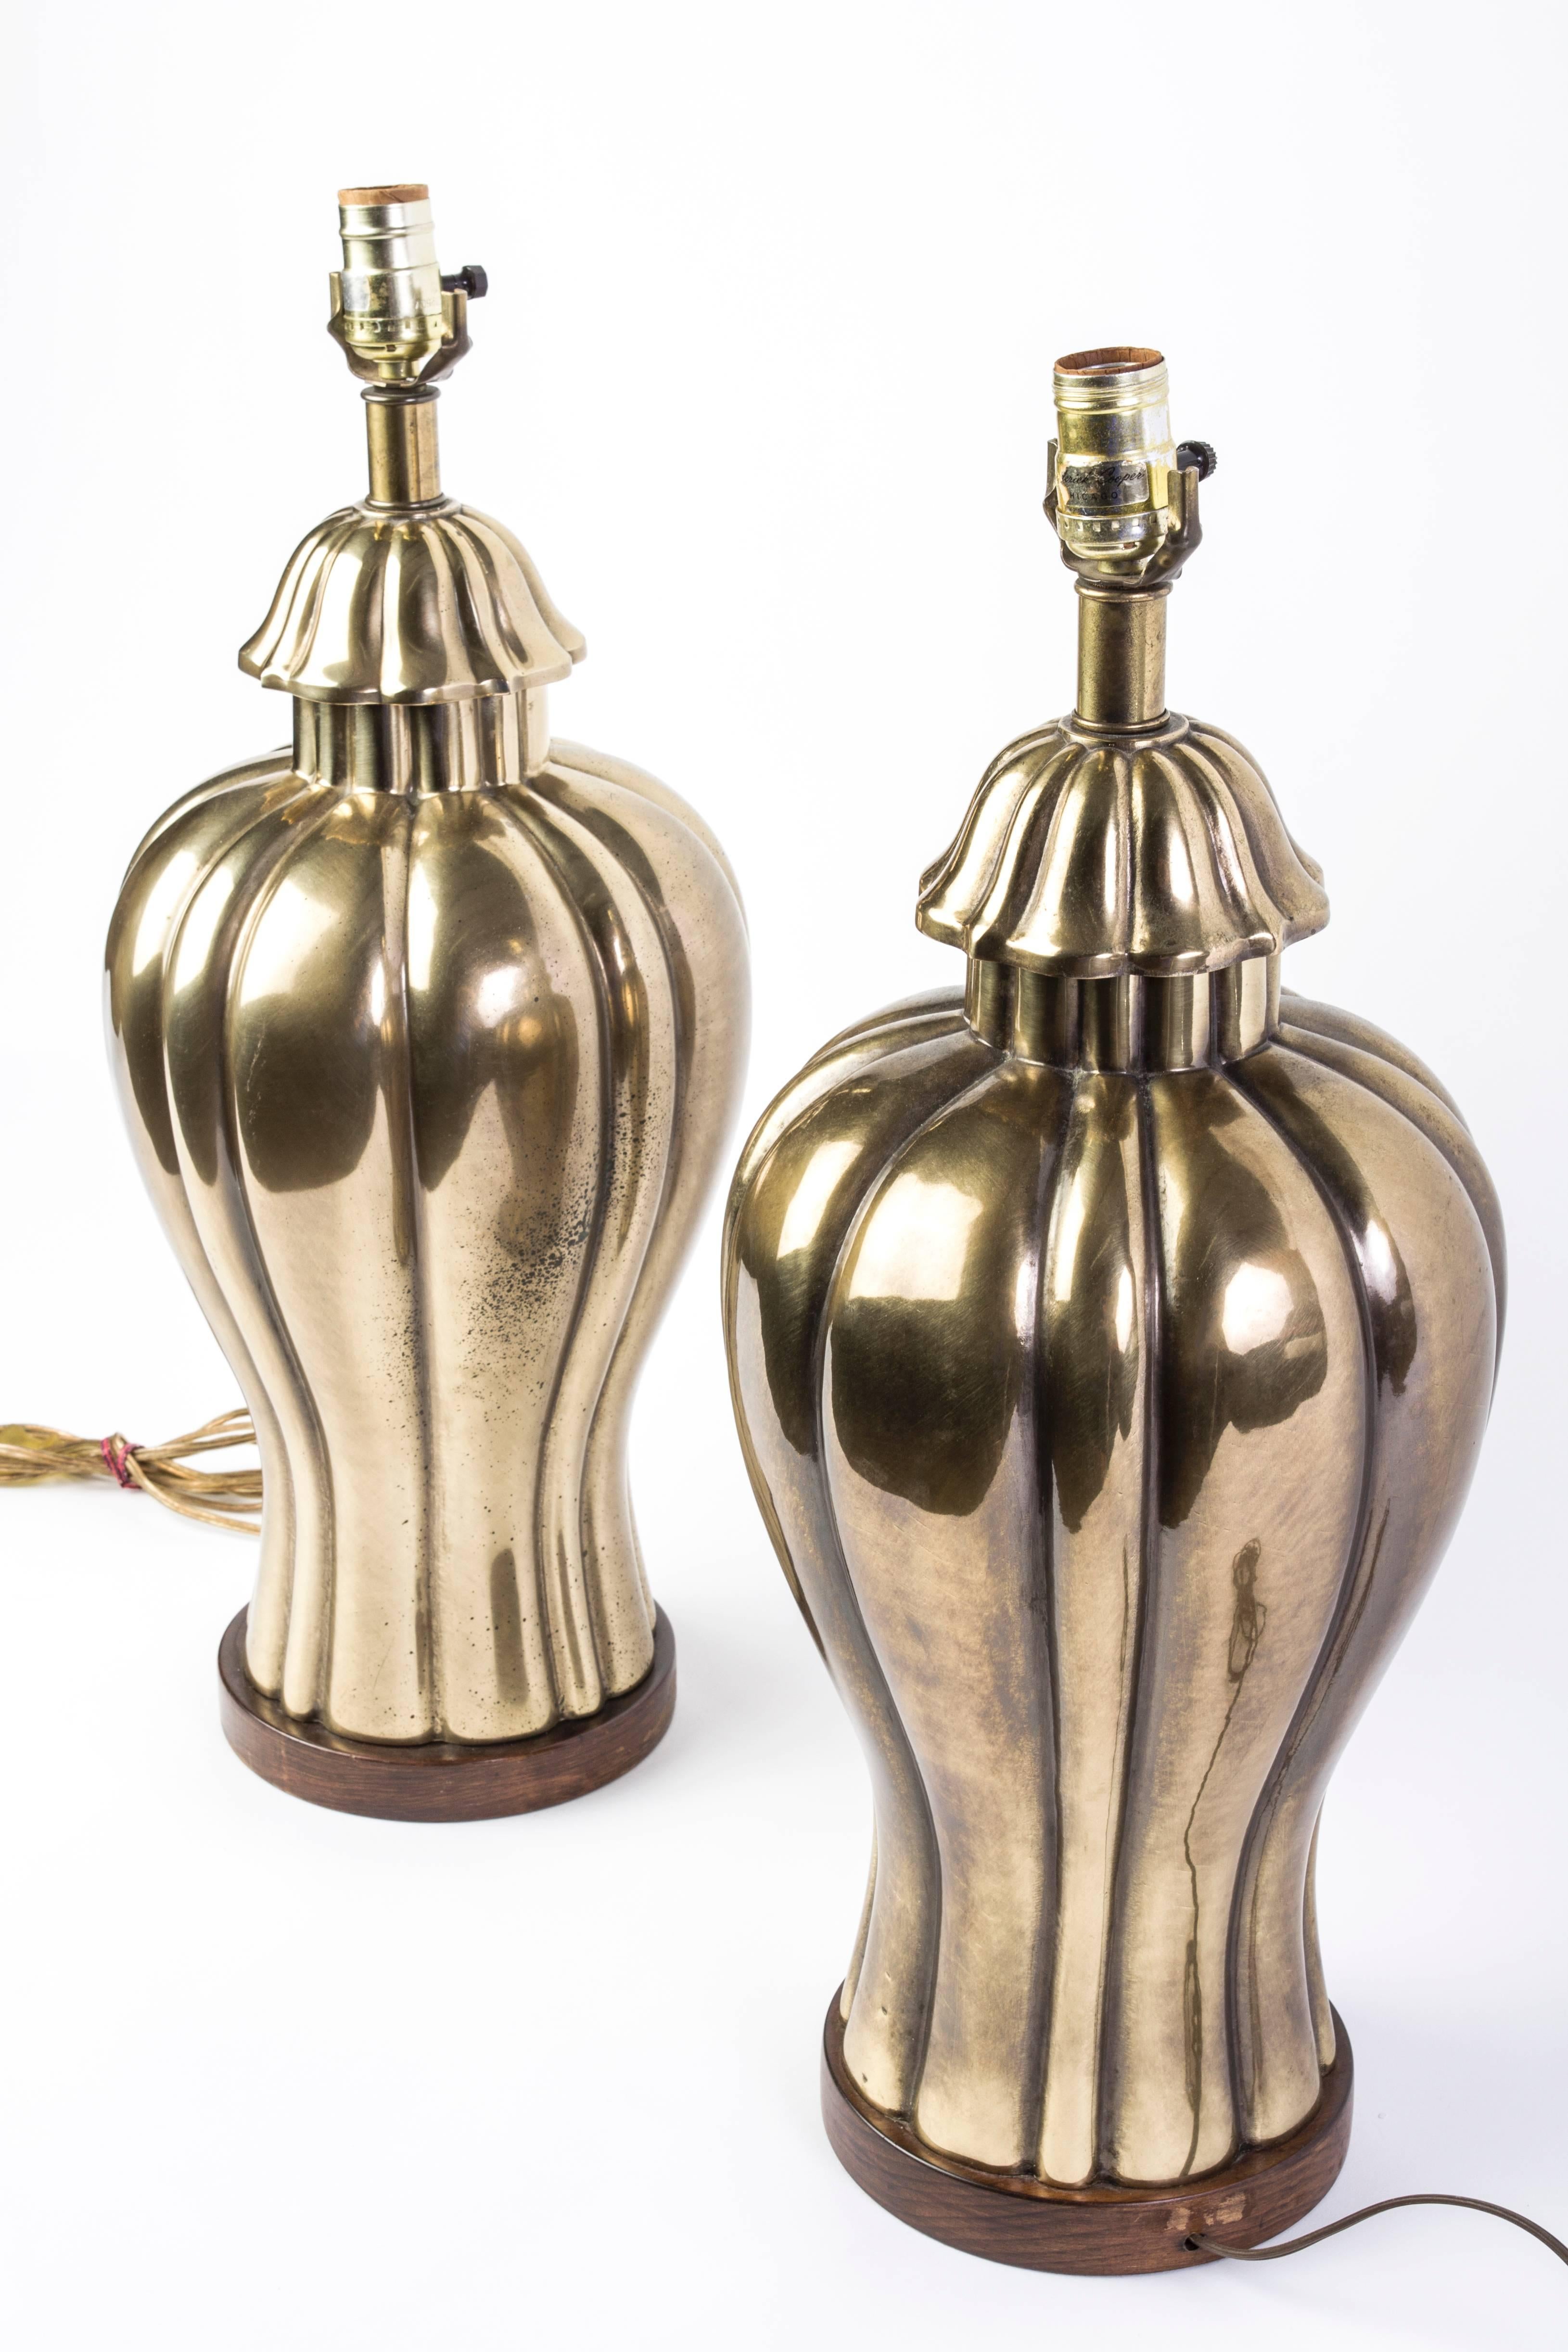 This elegant pair of 1970s vintage Frederick Cooper brass jar lamps 1970s are made from solid brass and are in excellent original condition. One lamp still bears the original gold Frederick Cooper sticker.